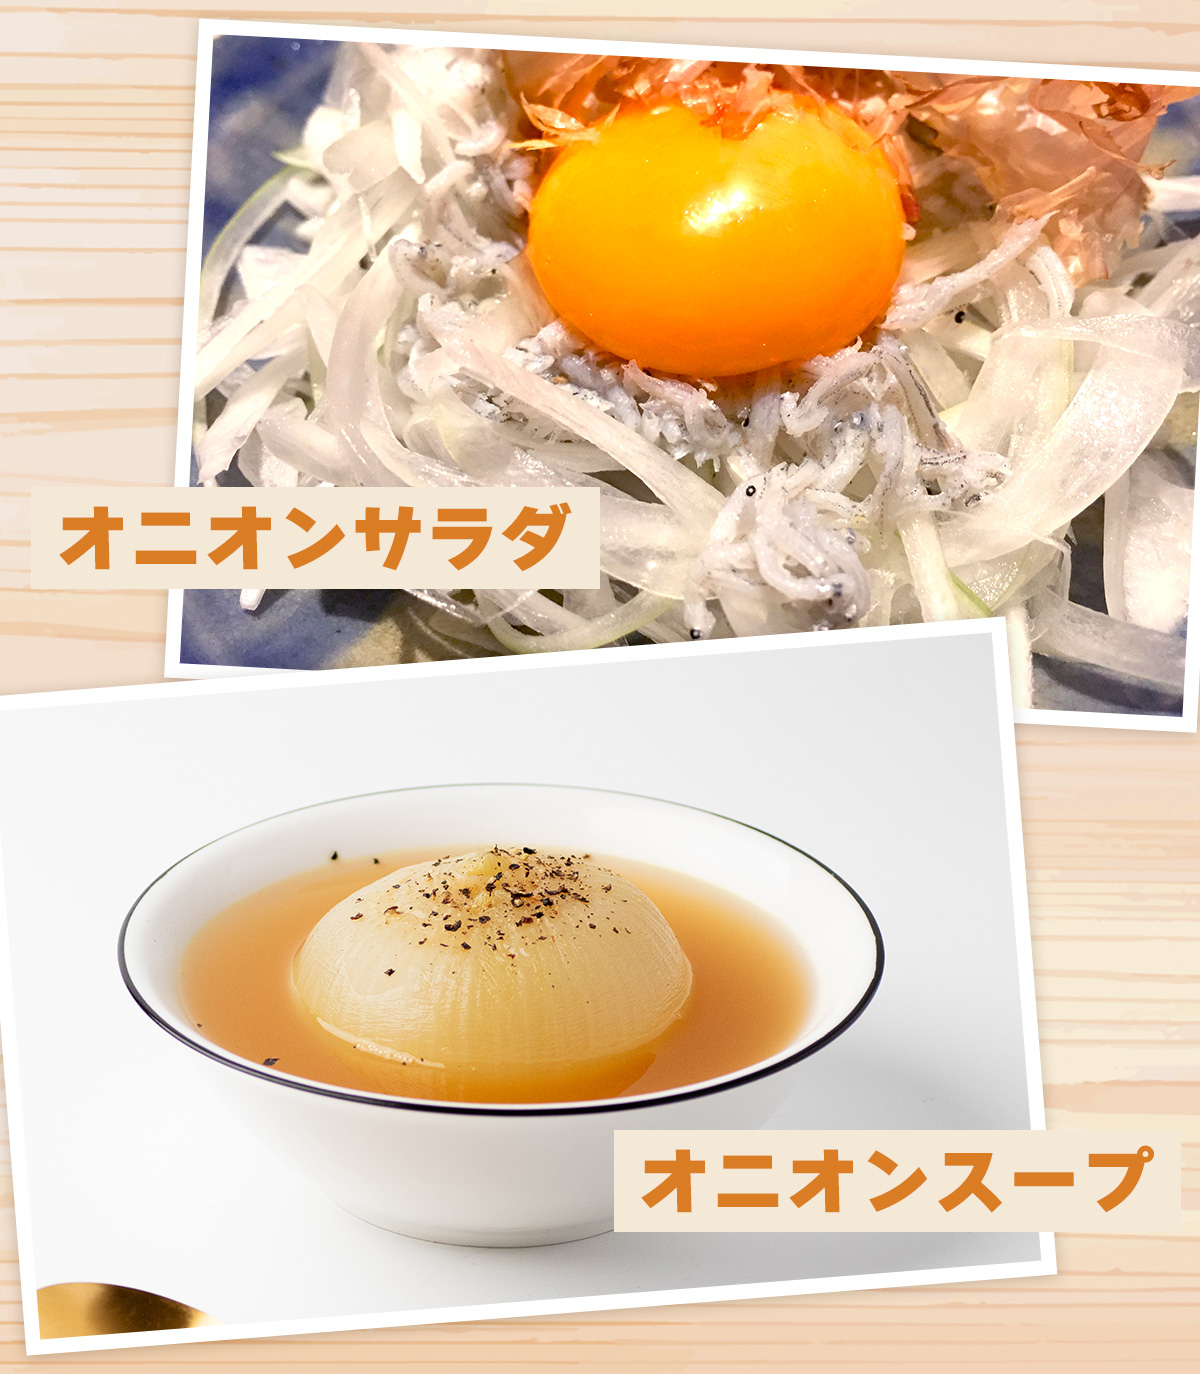  free shipping!! using cut rear .. middle sphere size Hokkaido net mileage production onion 10kg production ground carefuly selected actual place buying up sphere leek onion barbecue gift curry stew 